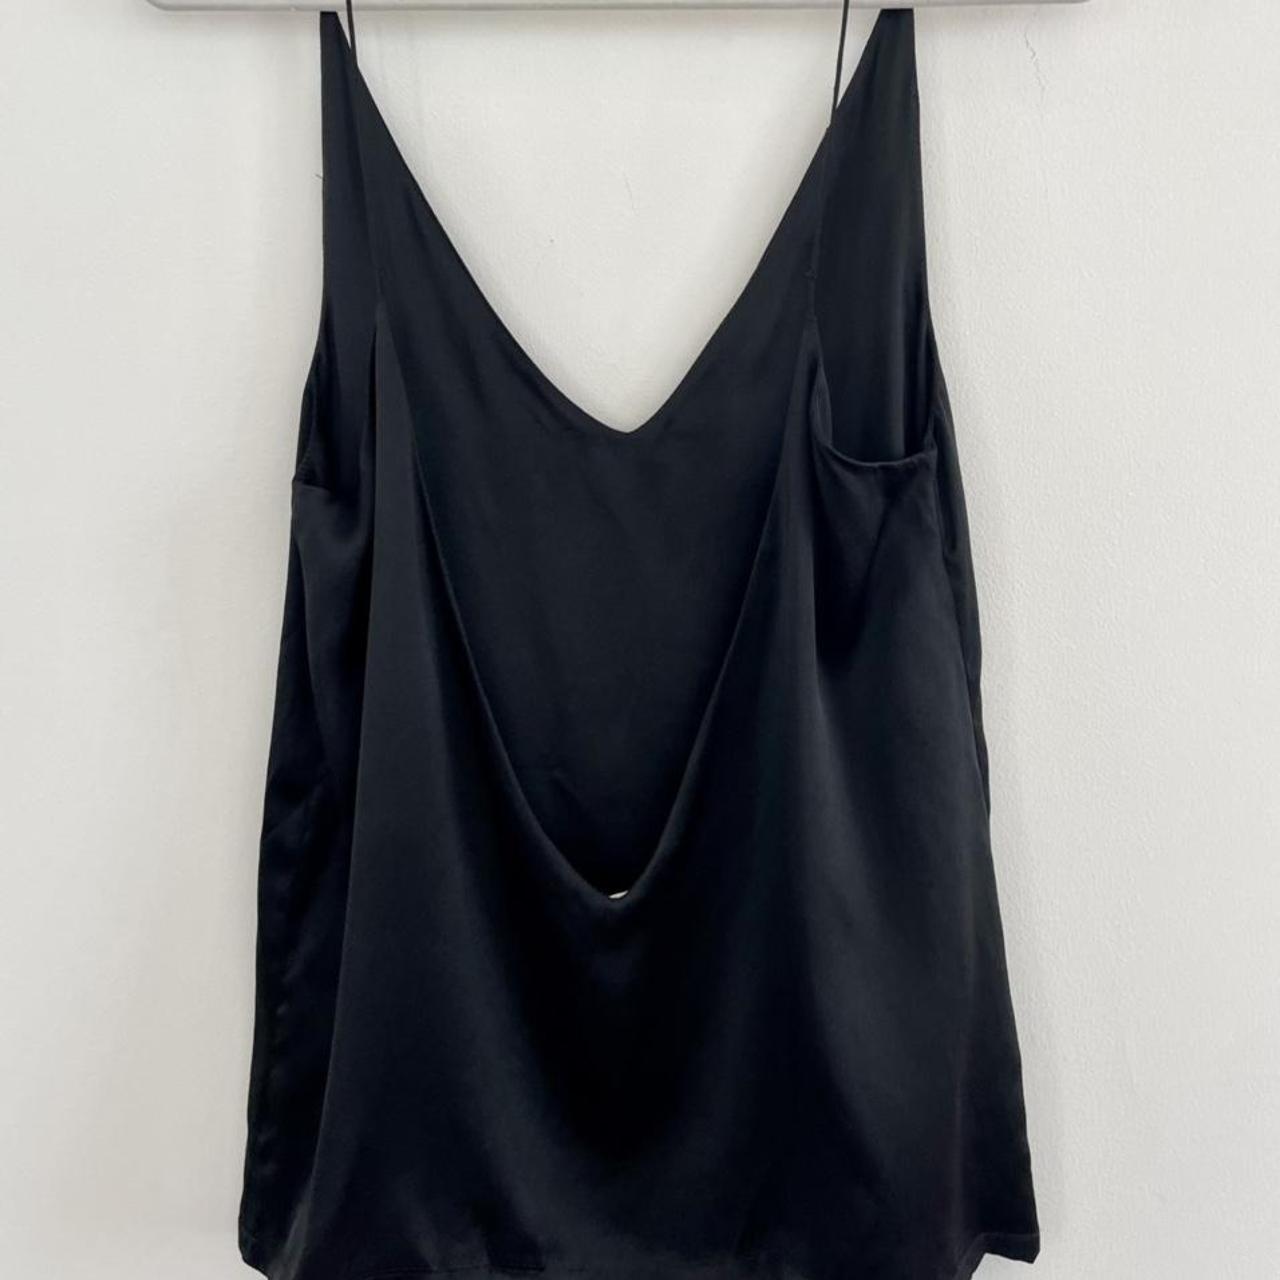 Product Image 2 - Sexy 100% silk black plunging